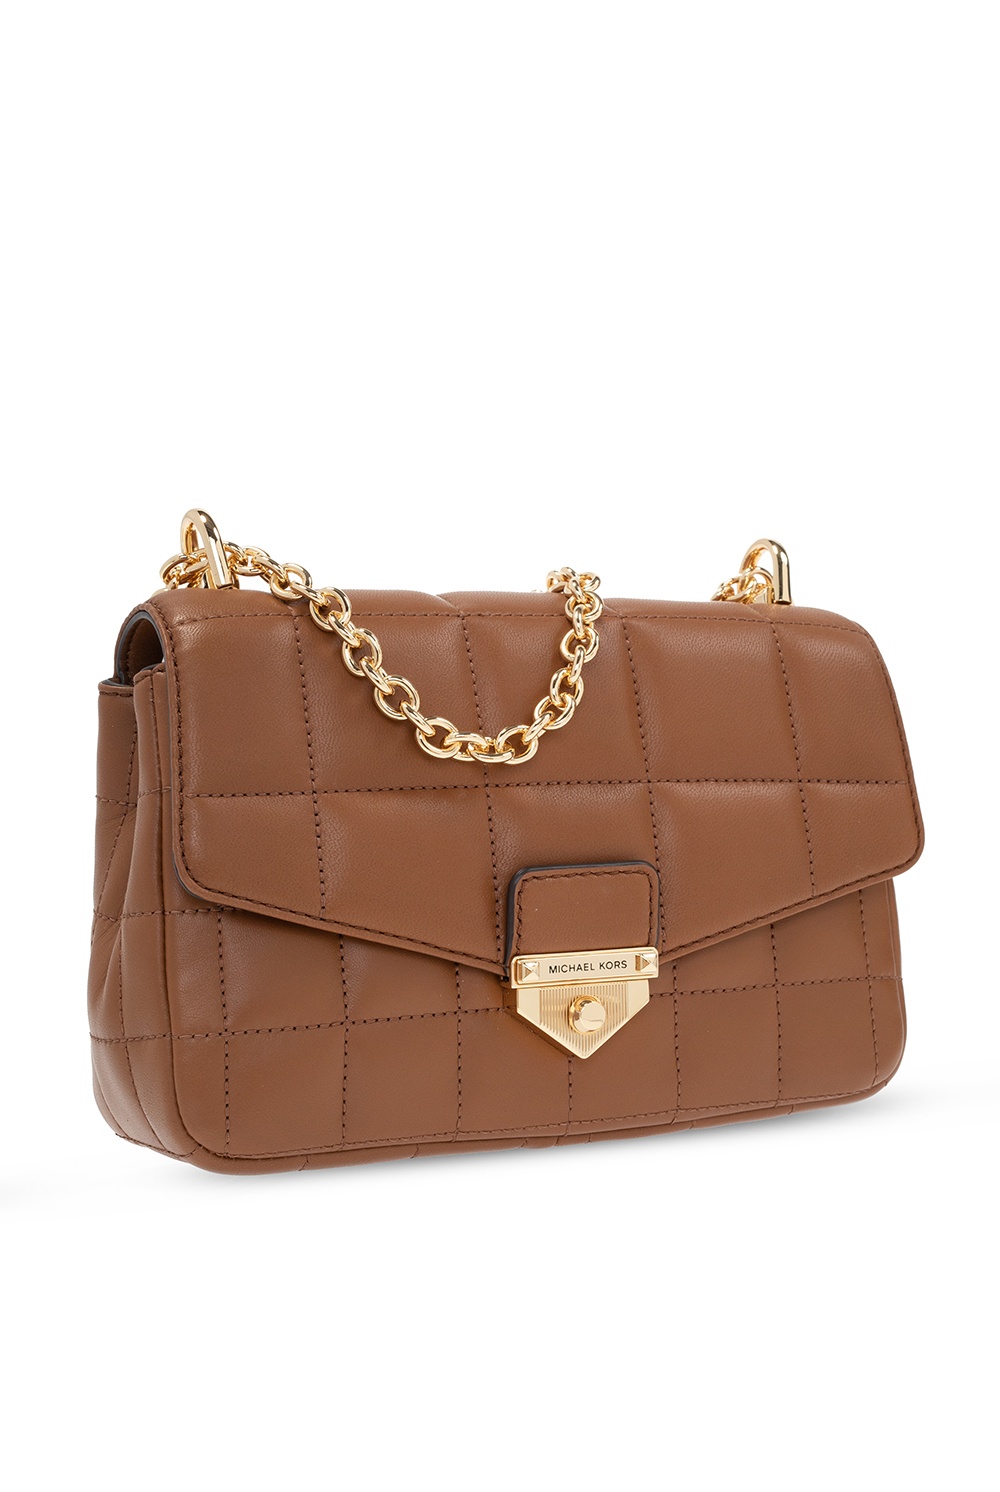 Leather Clutch bag Michael Kors, buy pre-owned at 40 EUR